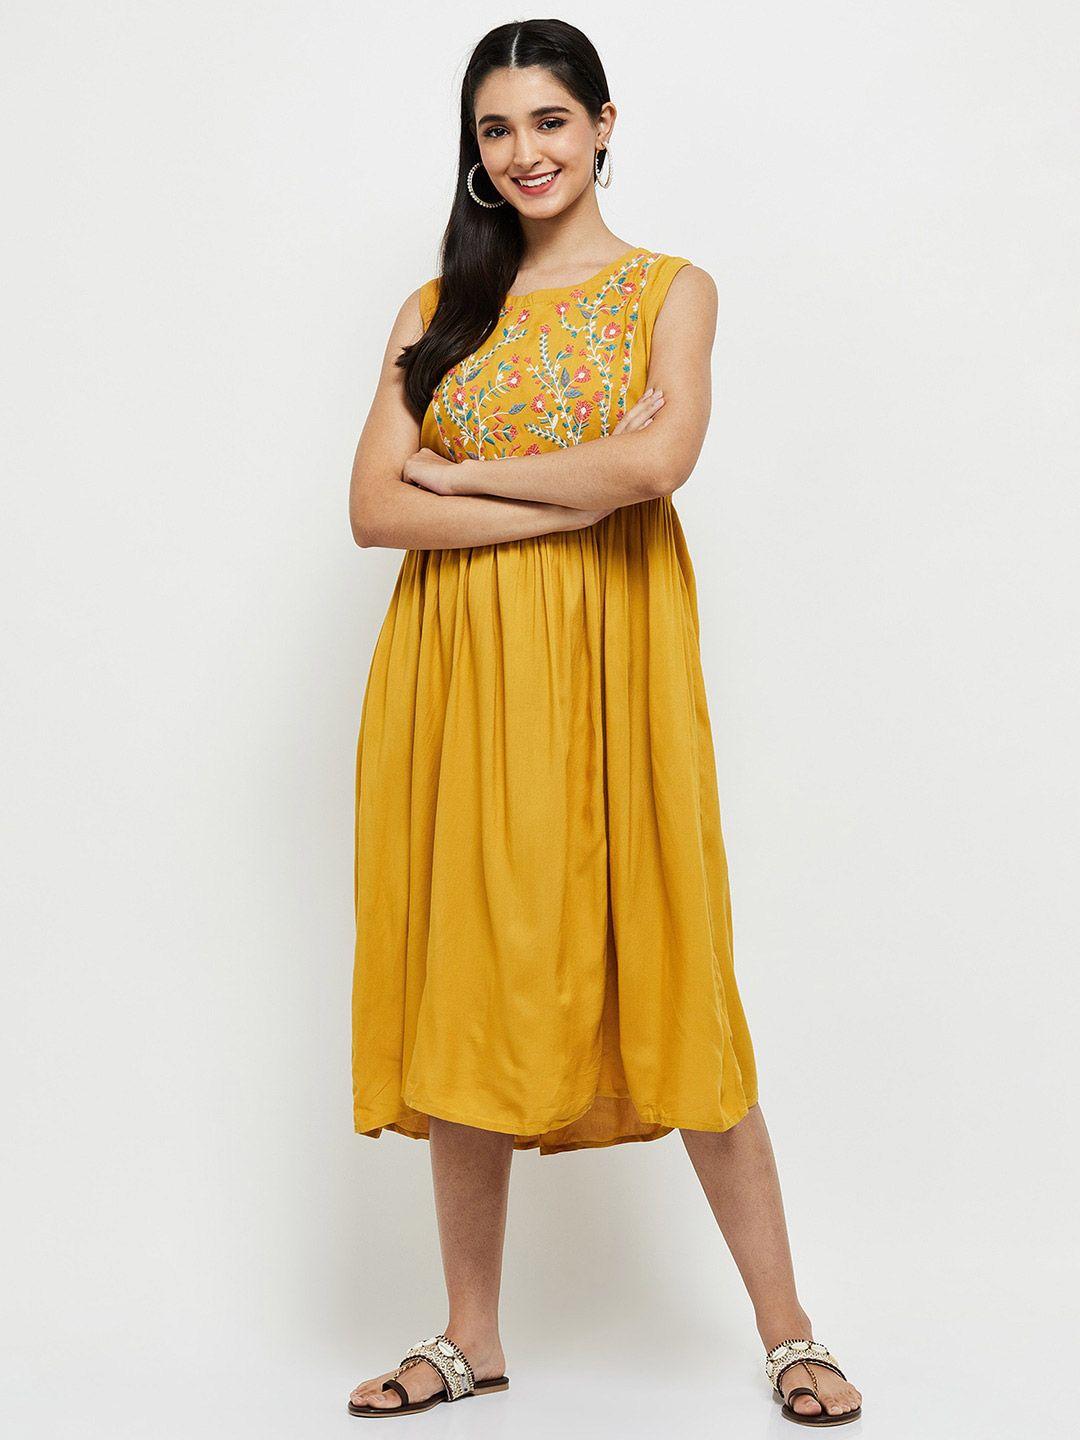 max mustard yellow & blue floral floral embroidered midi dress